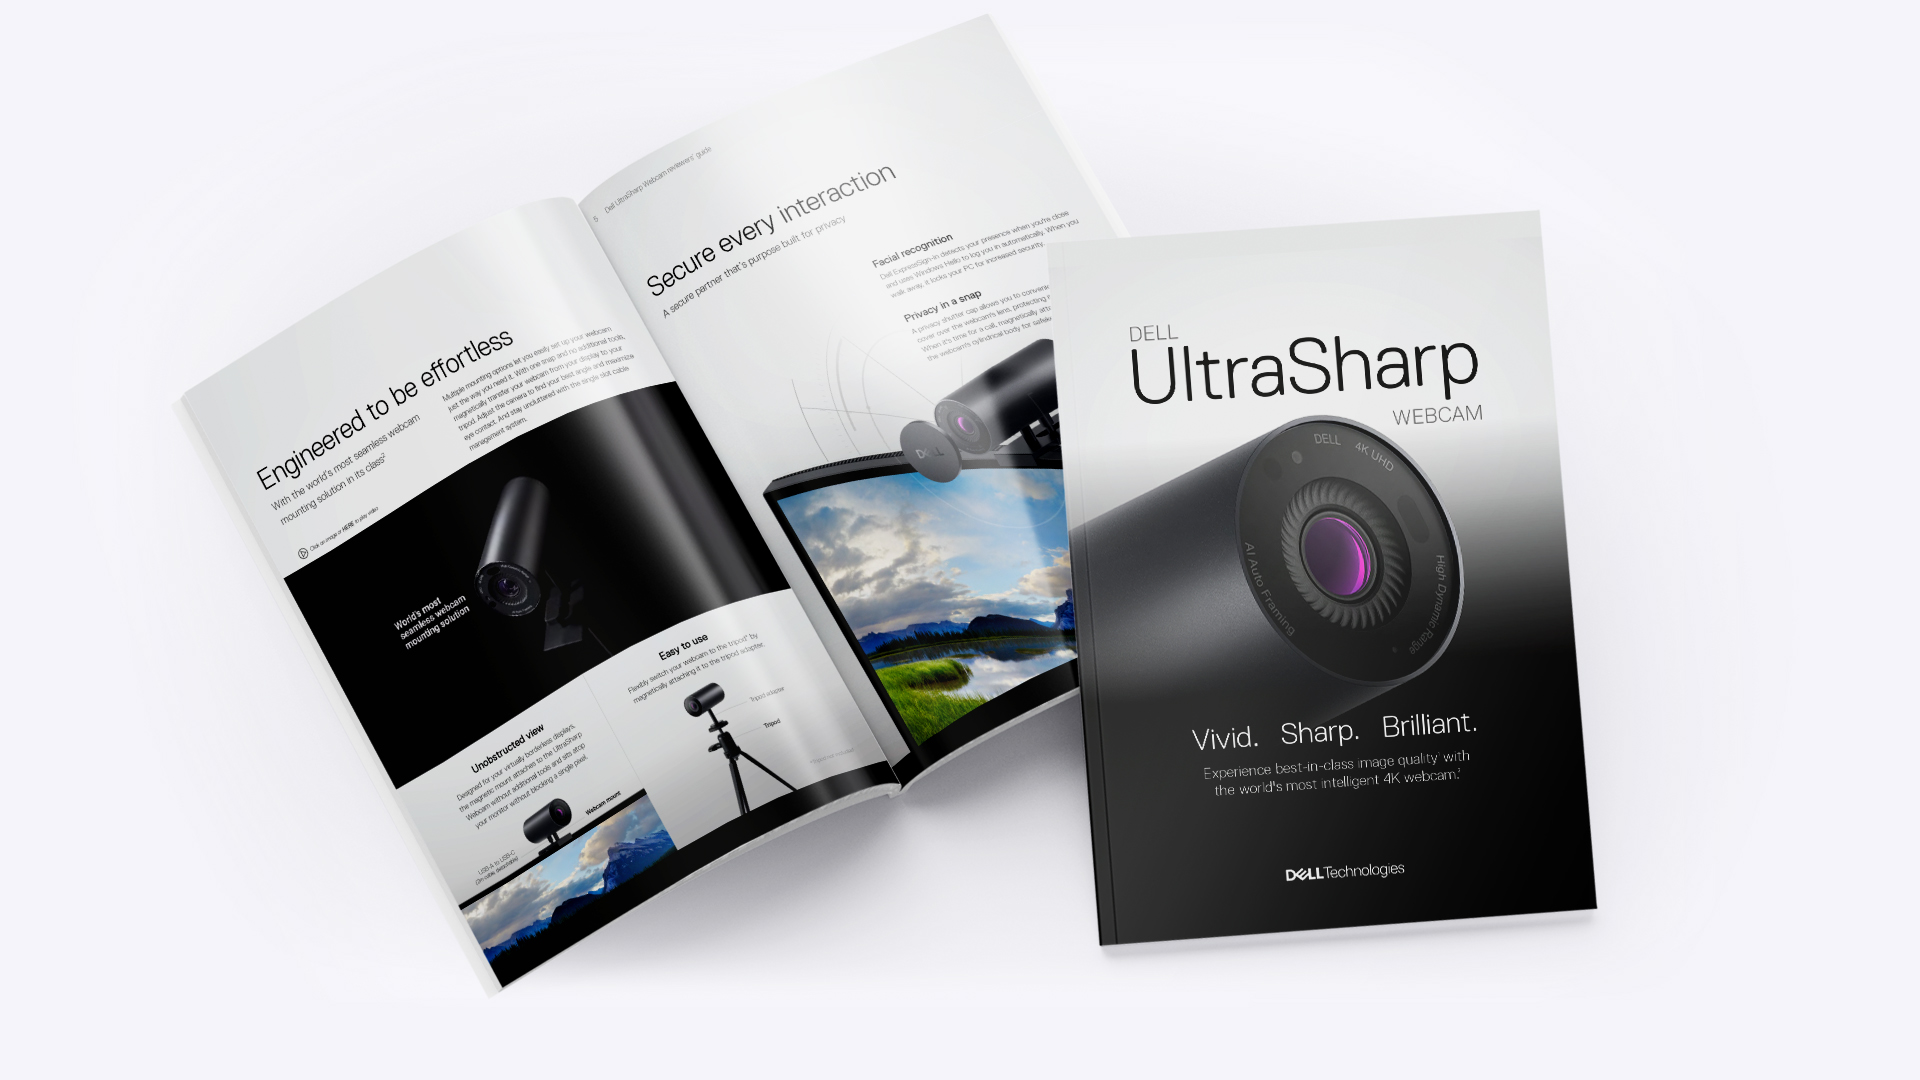 The cover and an interior spread of the product brochure for Dell UltraSharp Webcam.